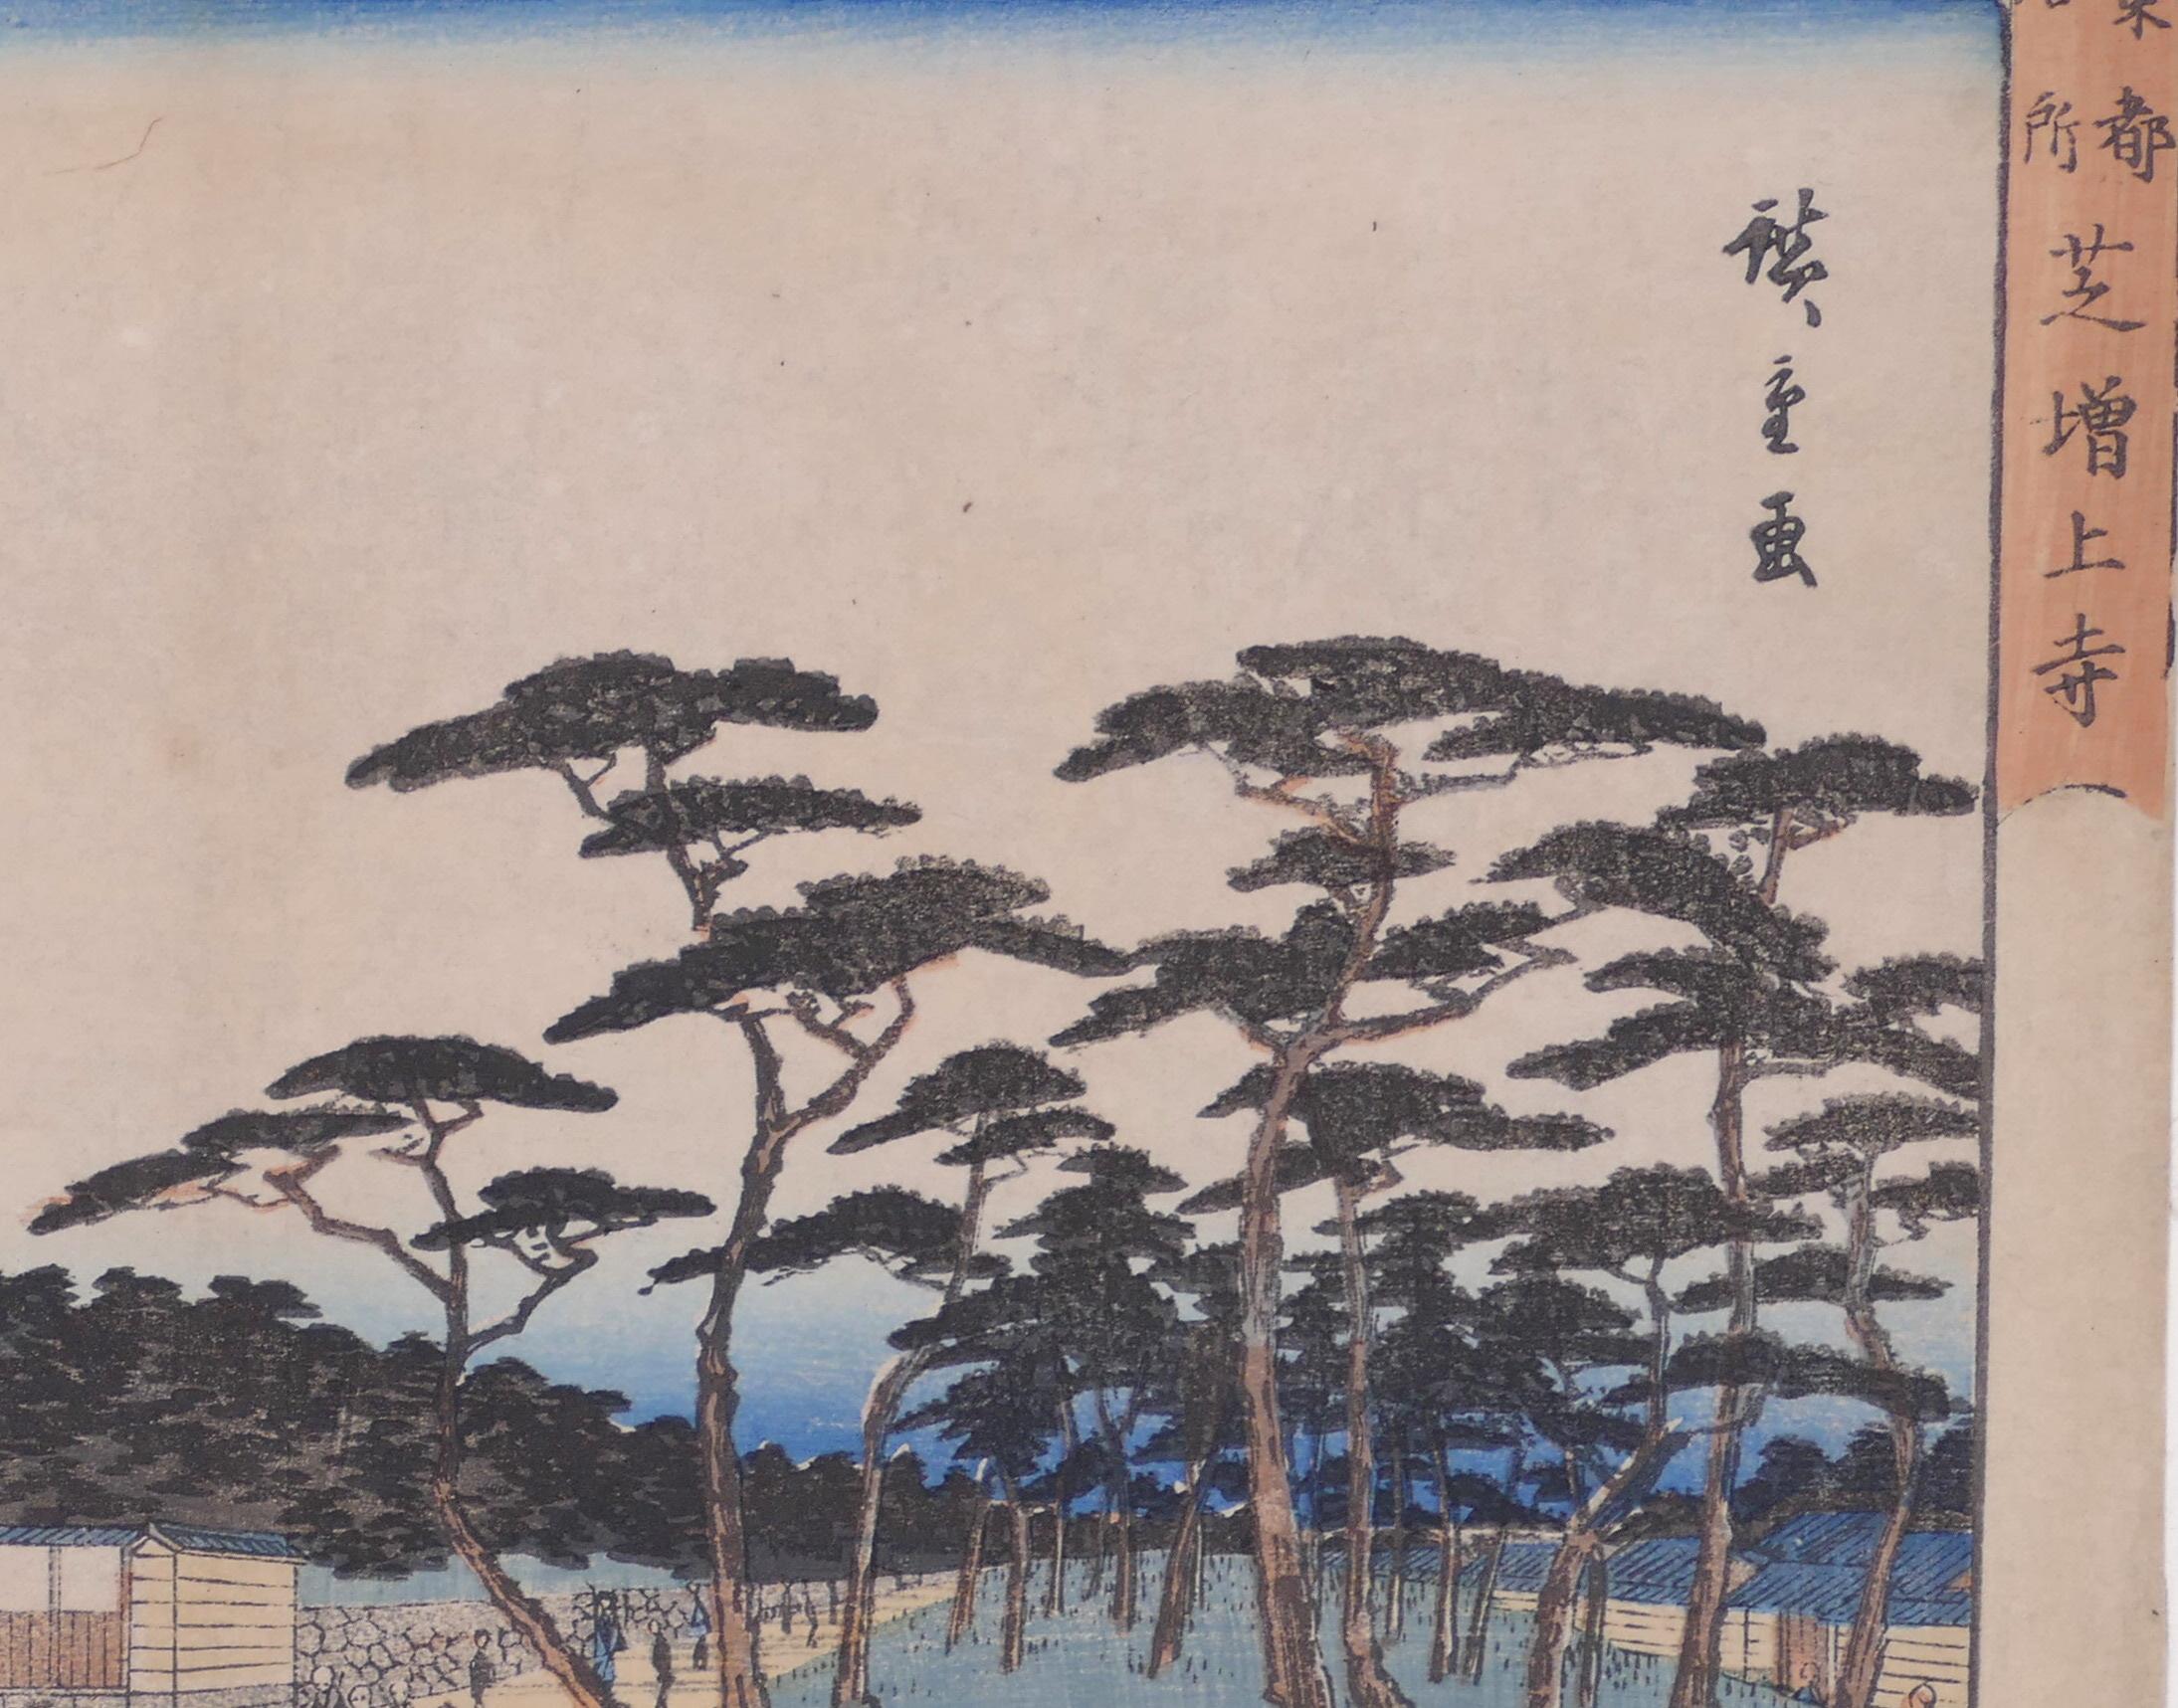 View of Zojo-ji Temple in Shiba is an original Modern artwork realized by Utagawa Hiroshige (Edo, 1797 - Edo, 1858) in the half of the 19th Century.

Original rare woodcut on paper, lifetime impression.

Mounted in folders.

Good conditions, except